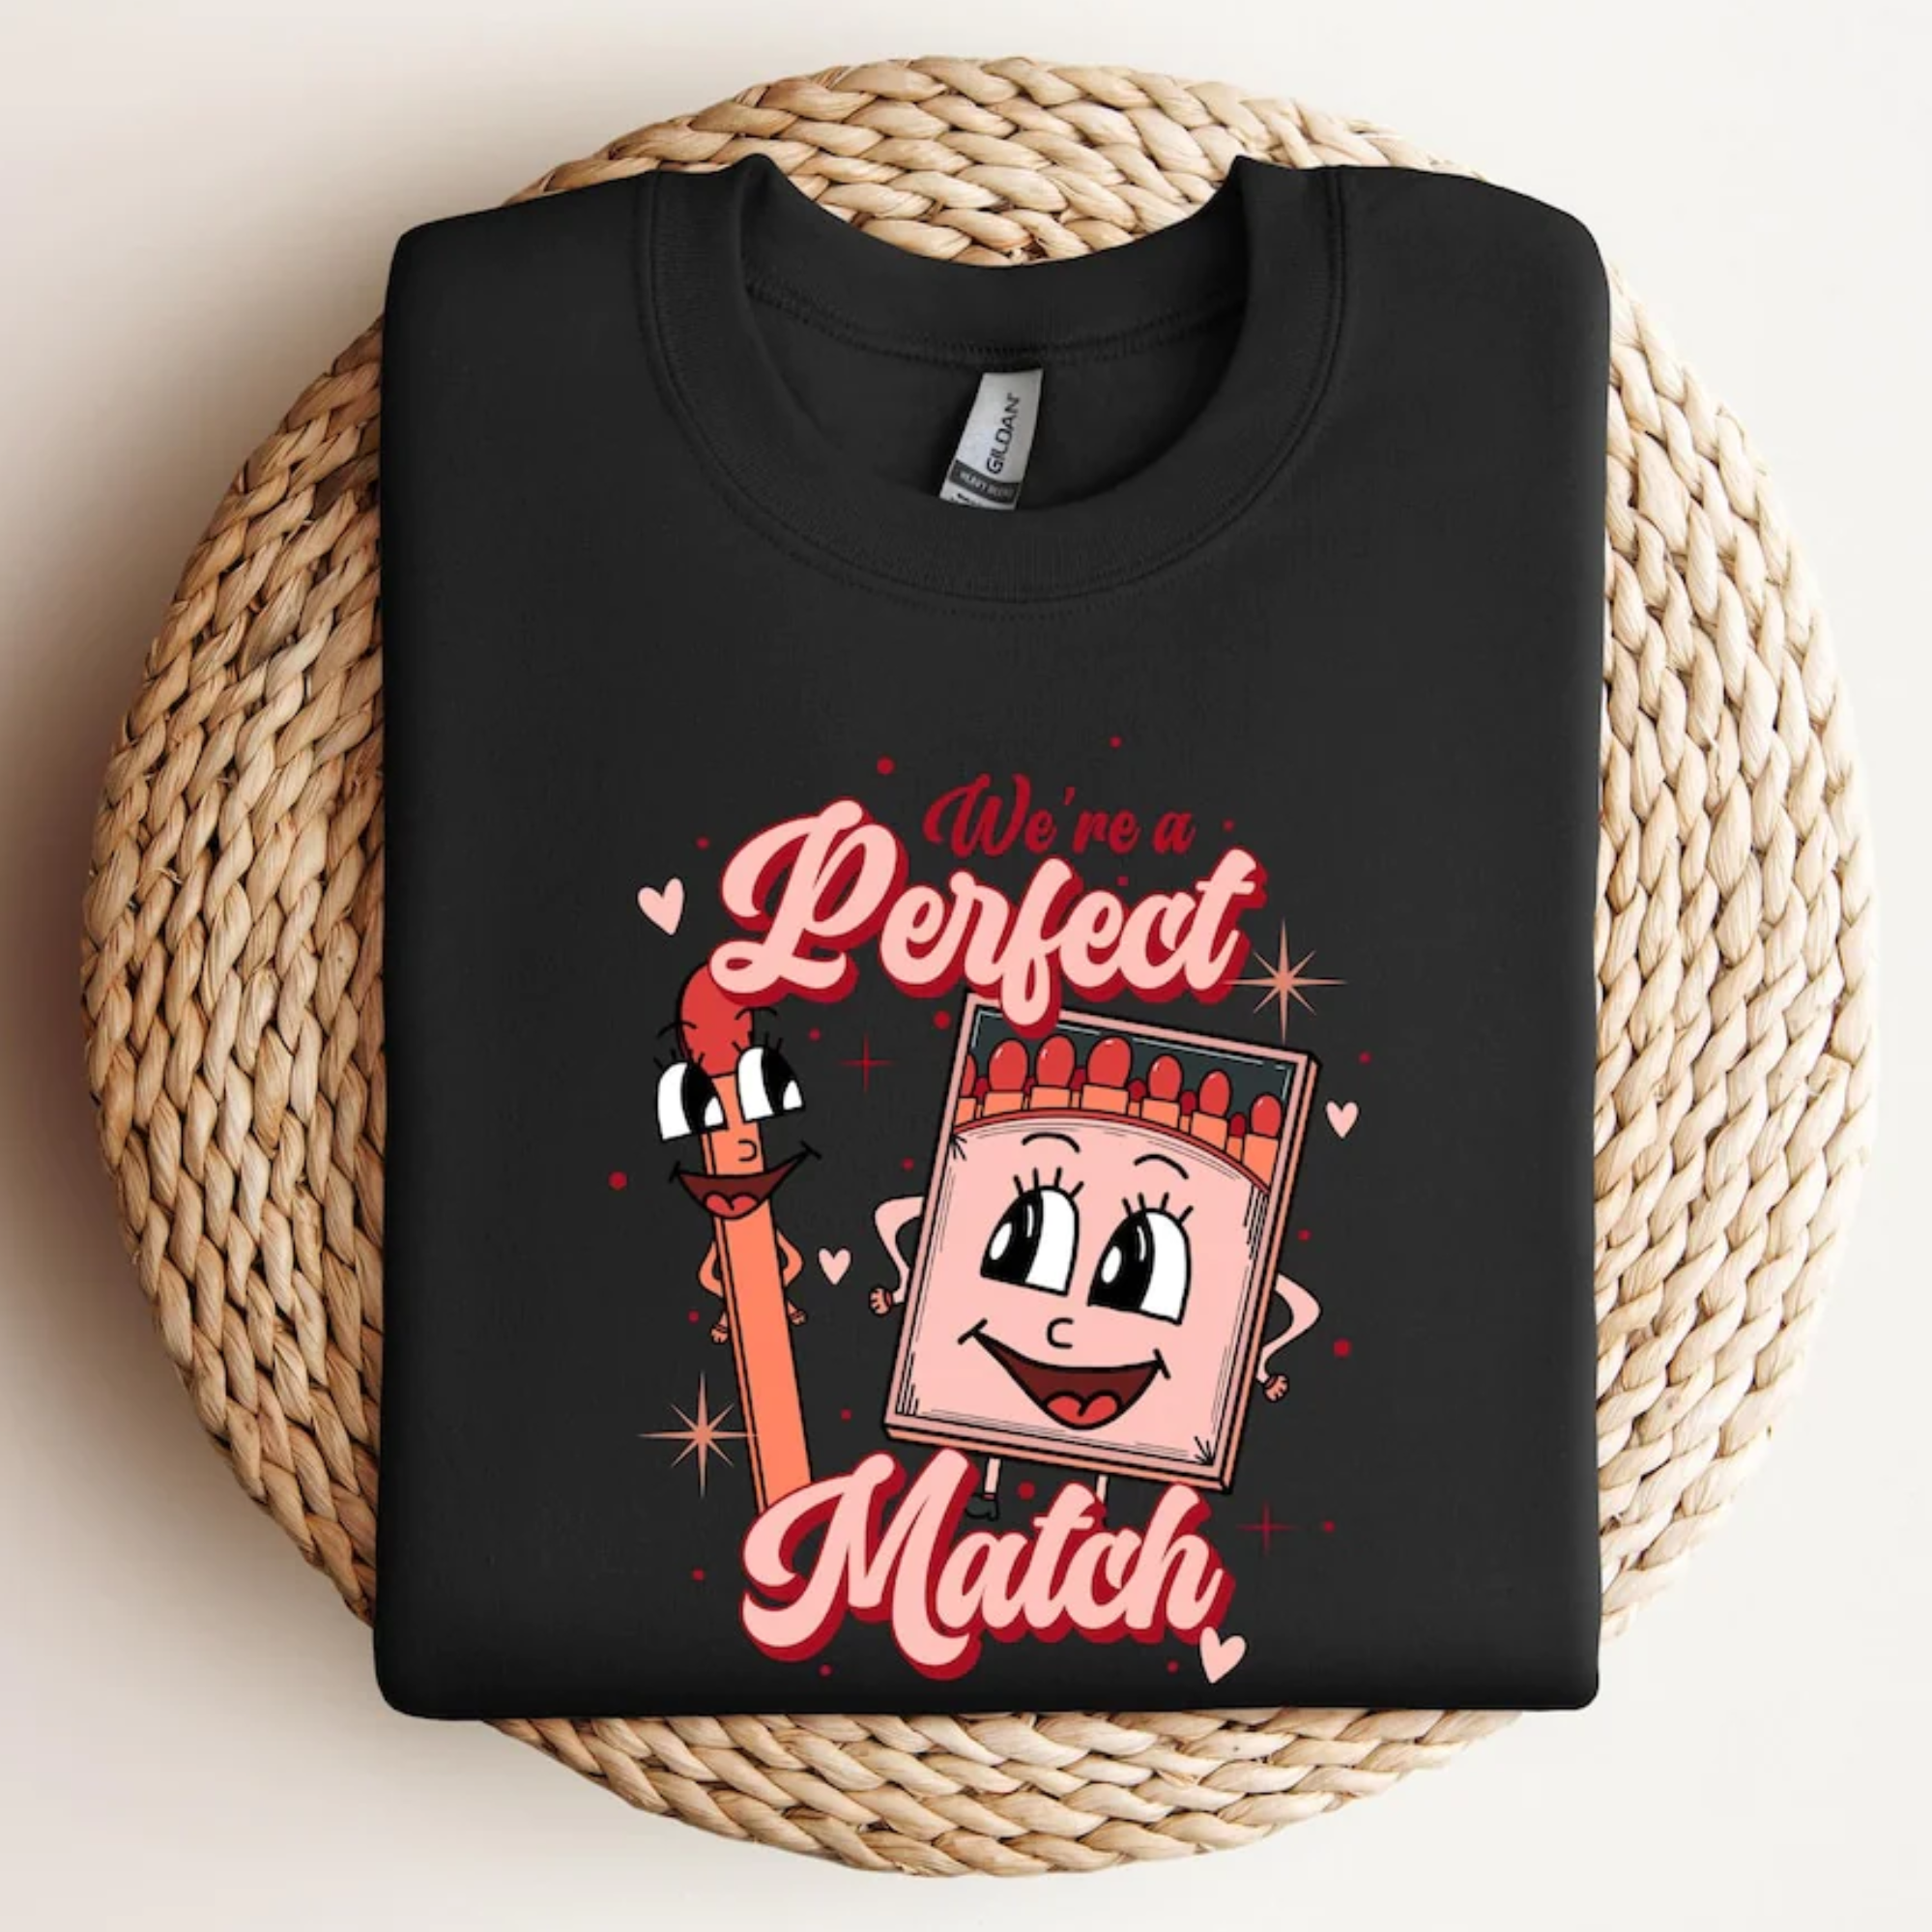 We’re A Perfect Match - Gift For Couple, Wife, Girlfriend - Unisex Shirt